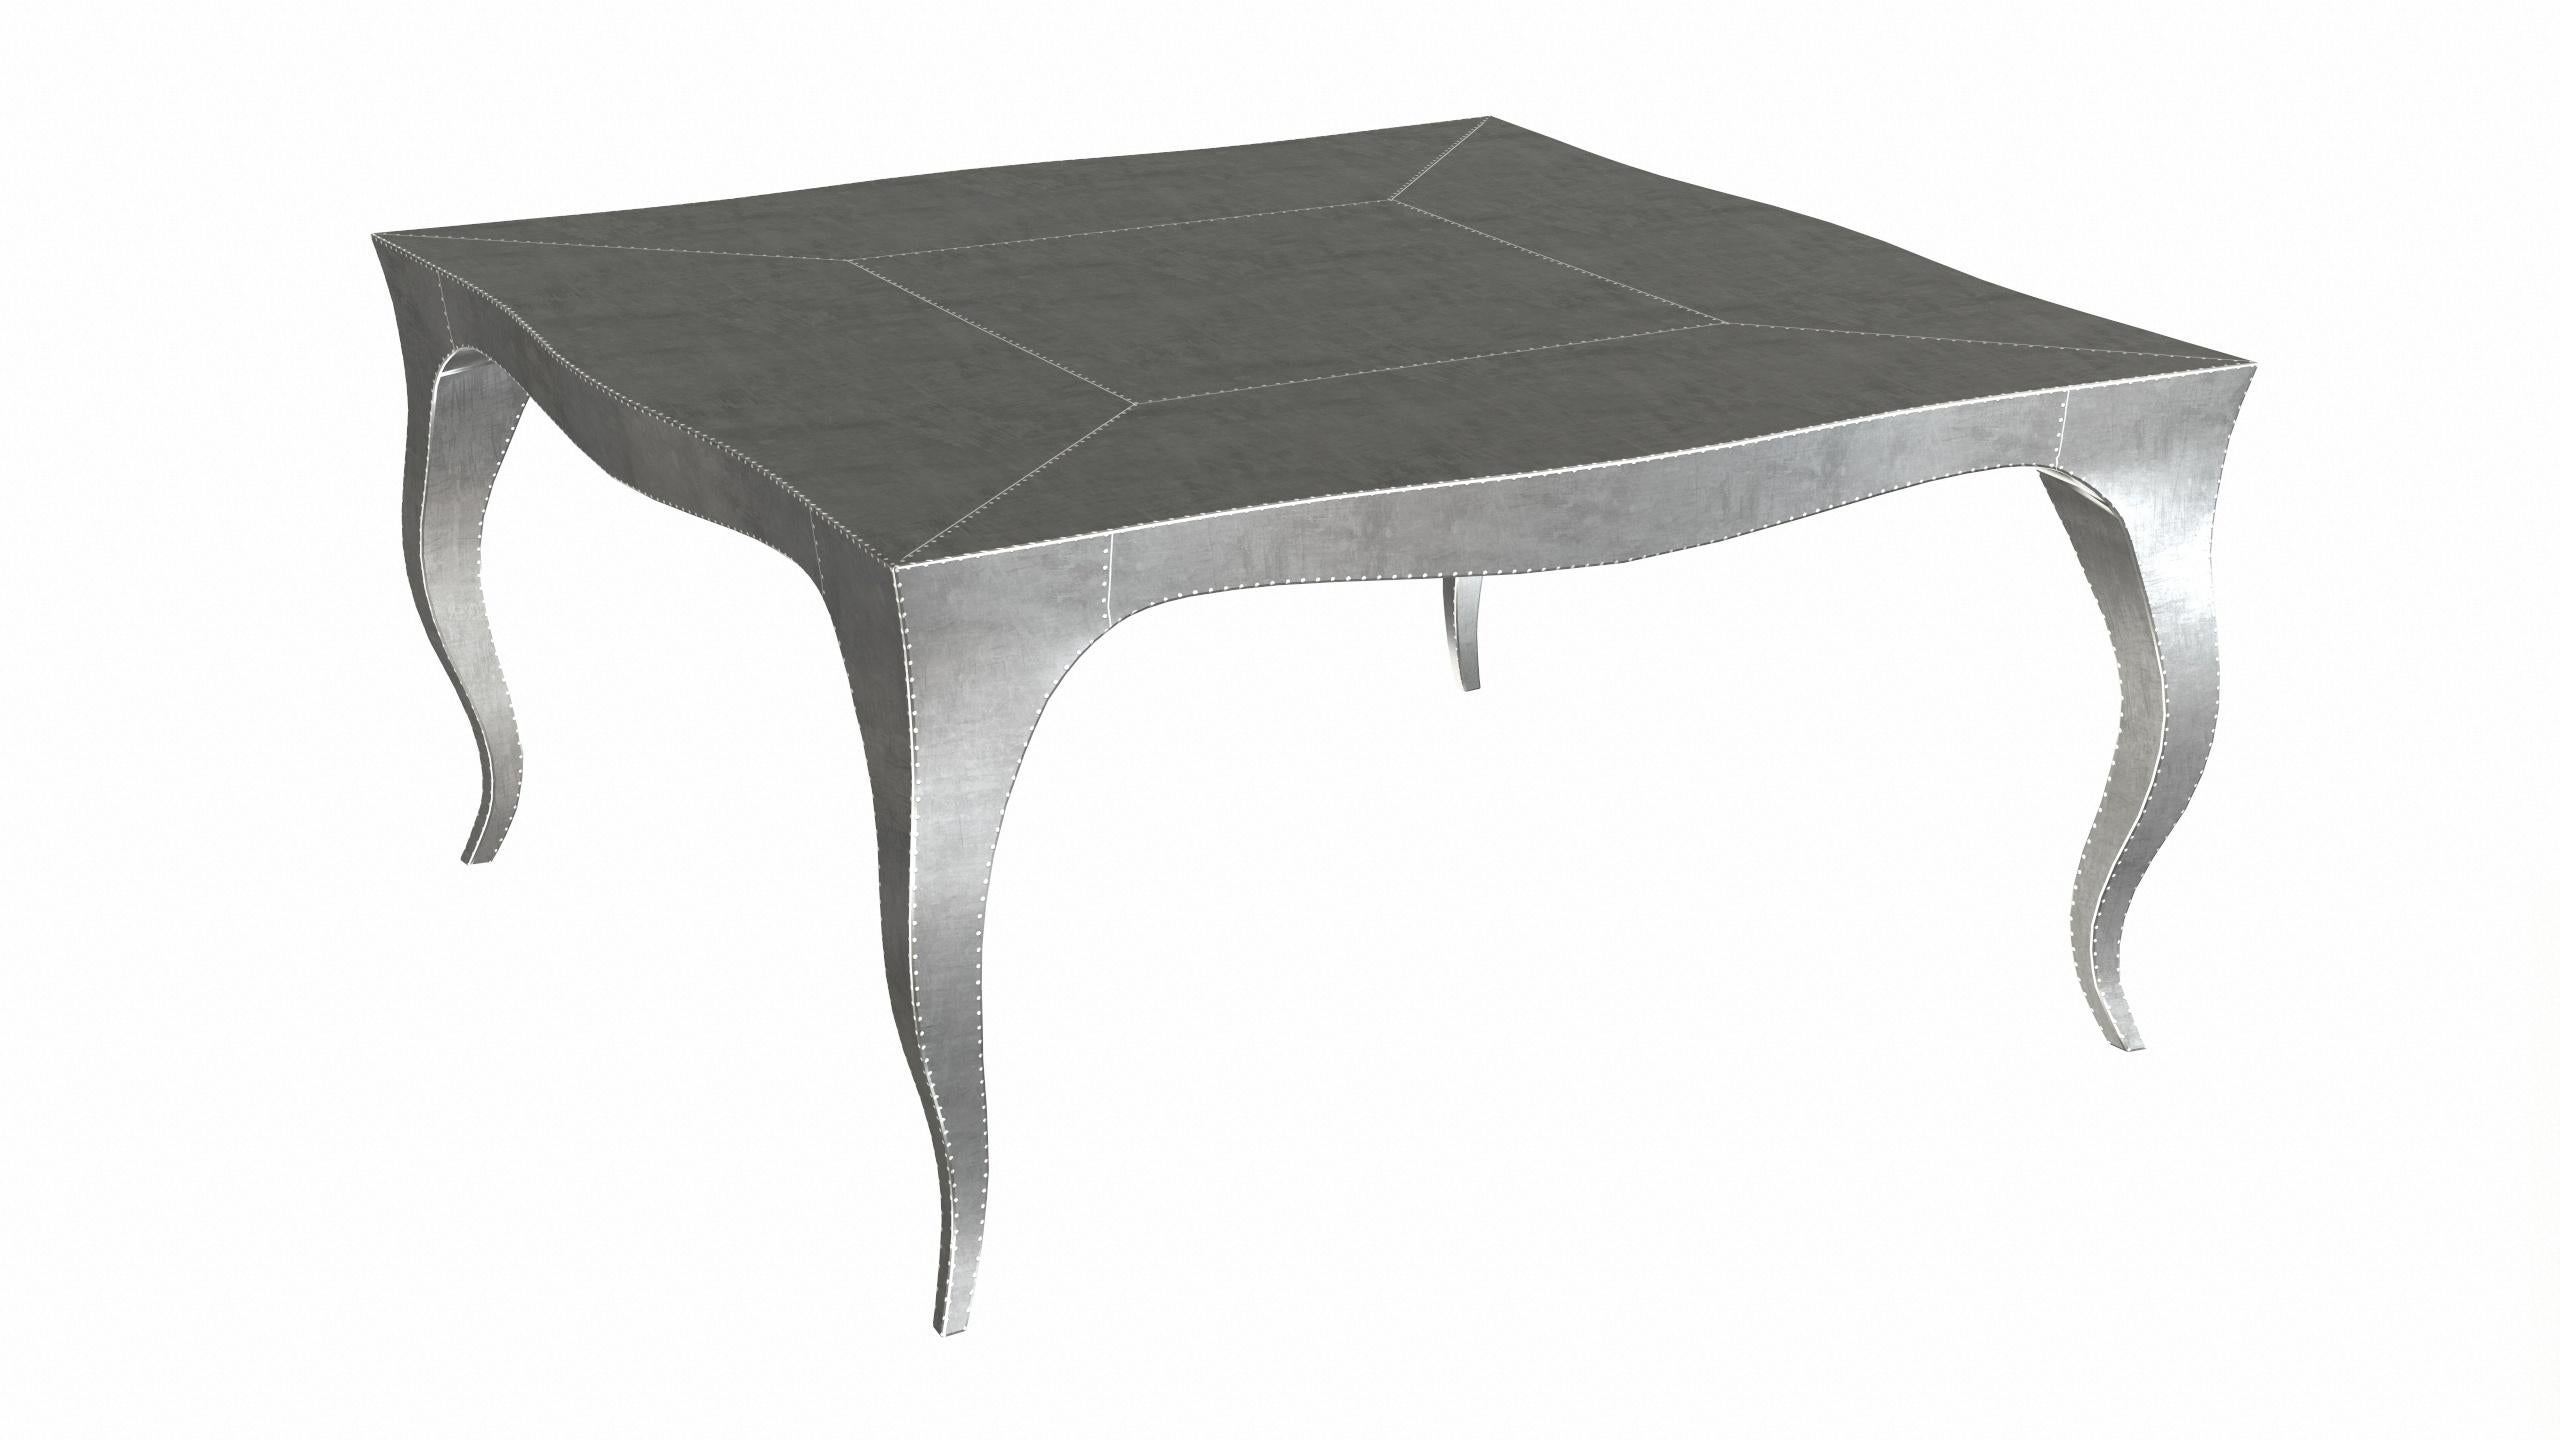 American Louise Art Deco Industrial and Work Tables Smooth White Bronze 18.5x18.5x10 inch For Sale